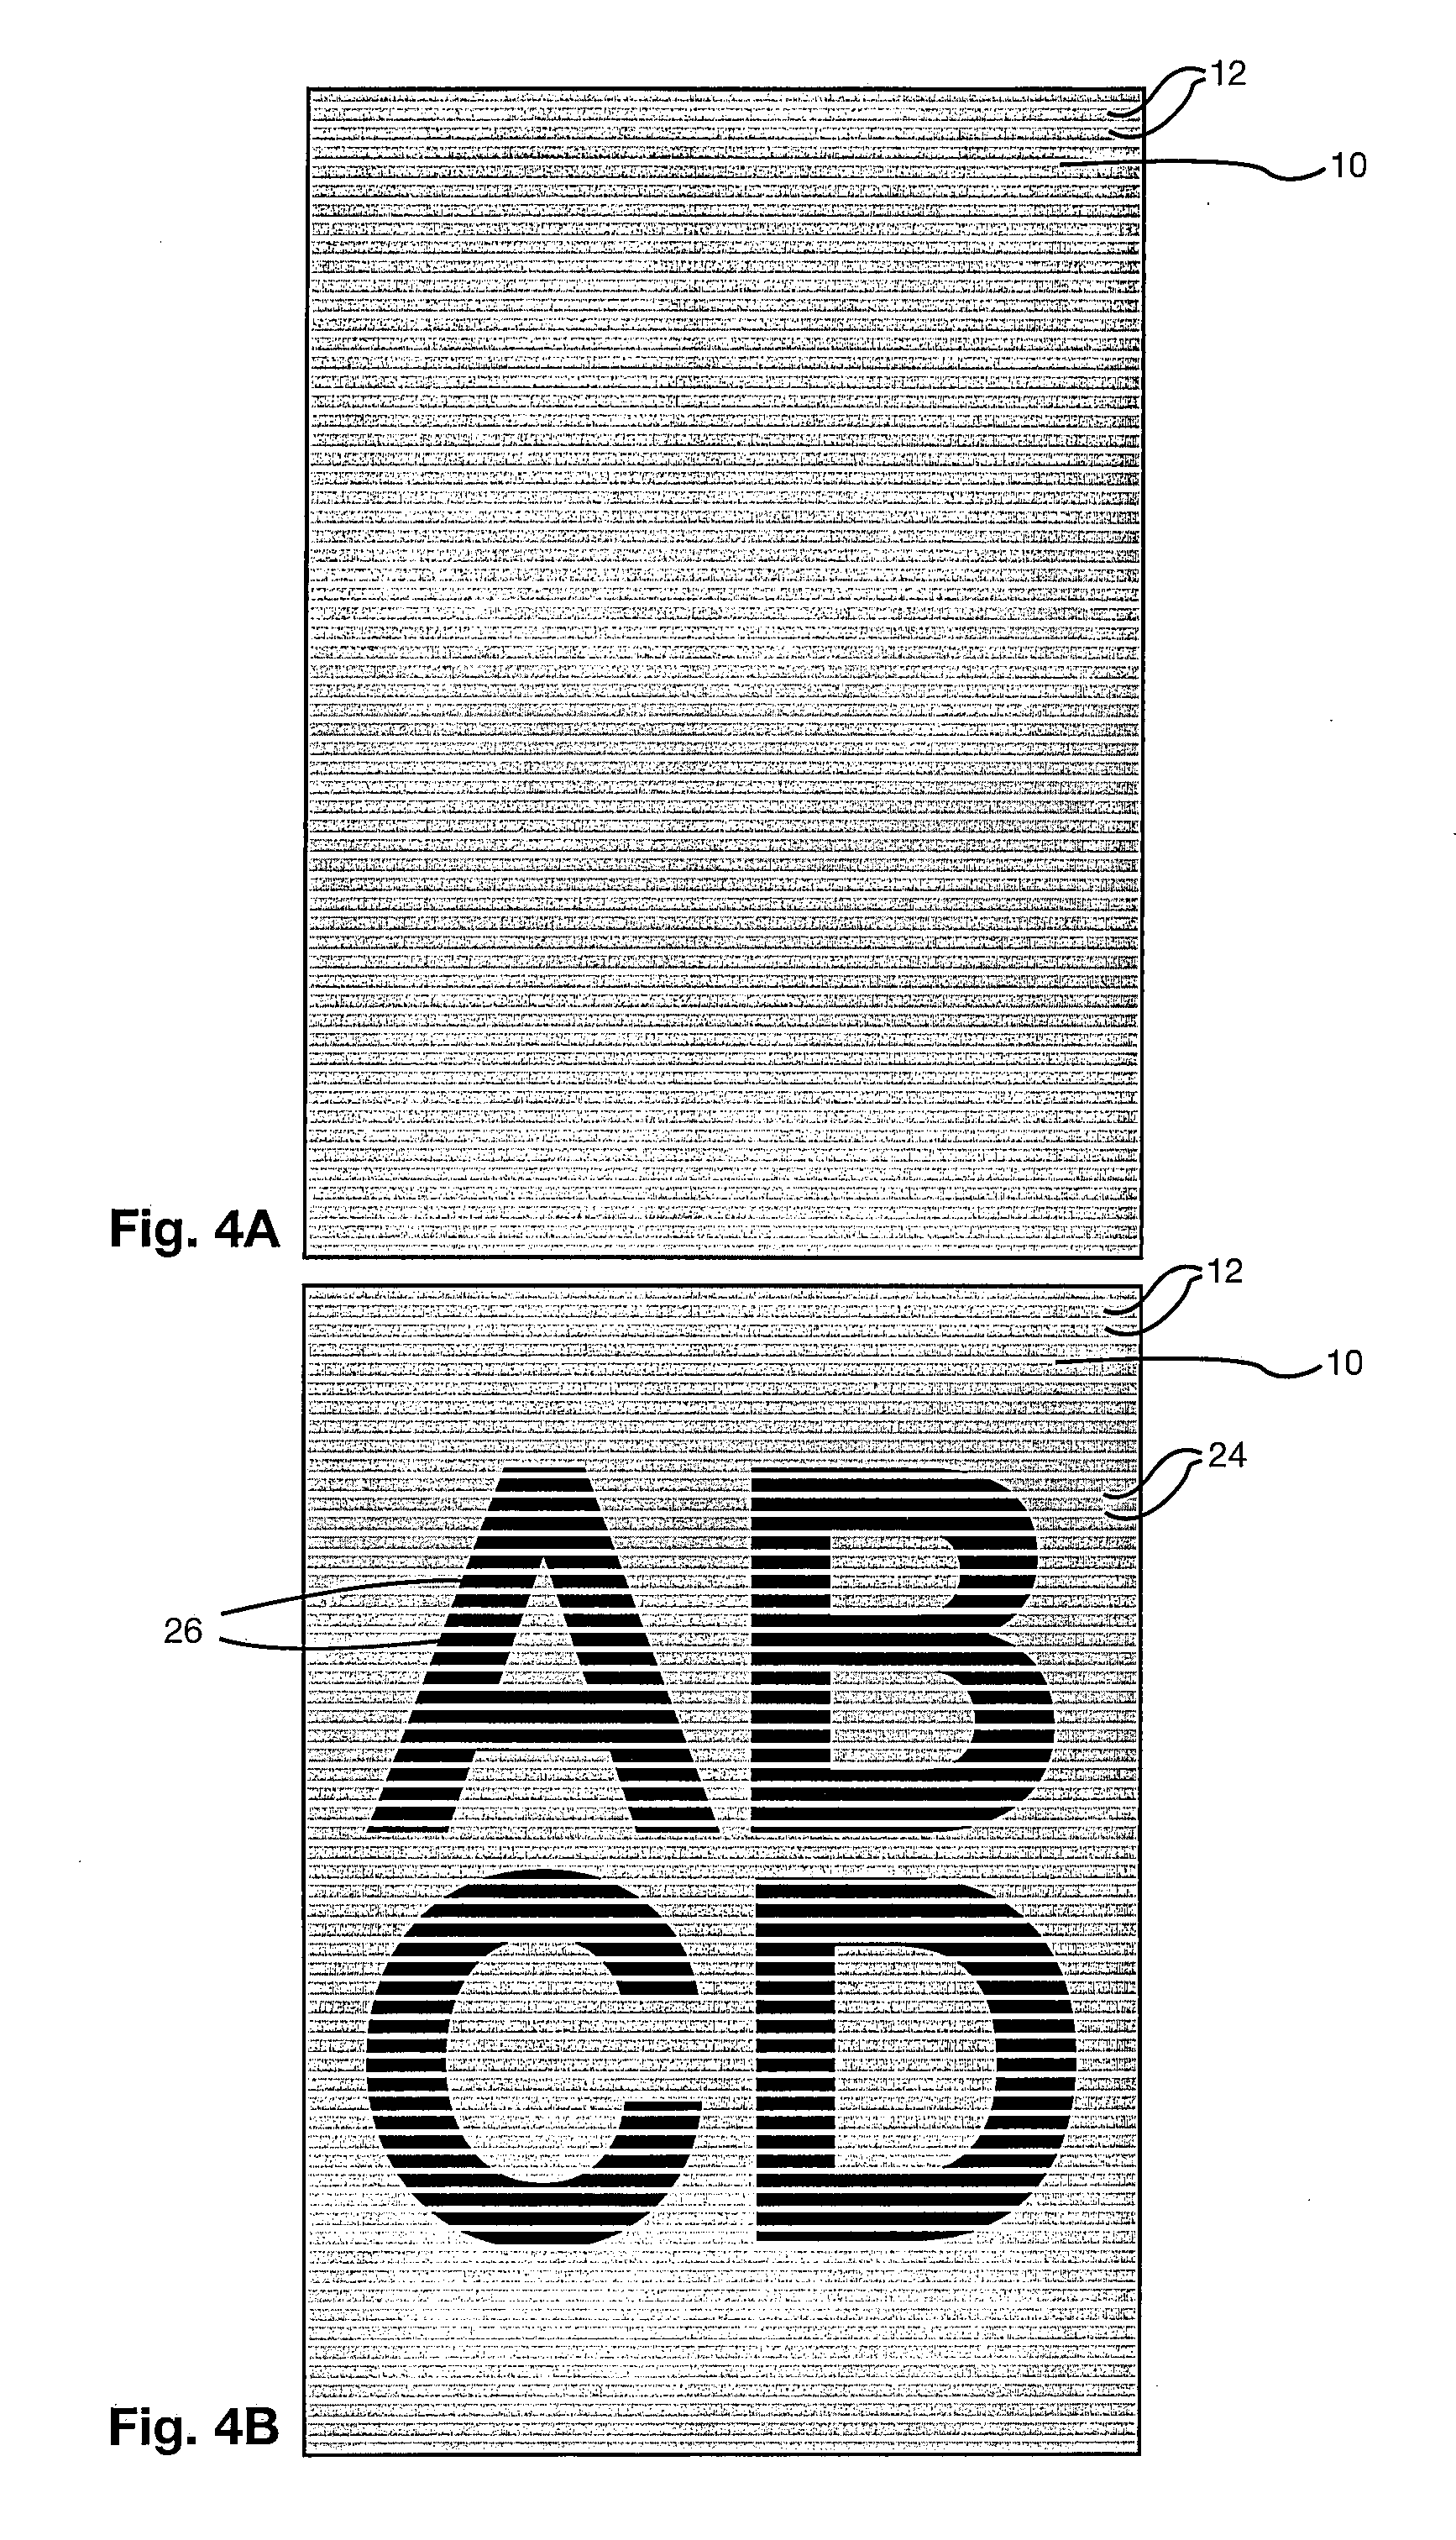 Inkjet printing partially imaged panels with superimposed layers